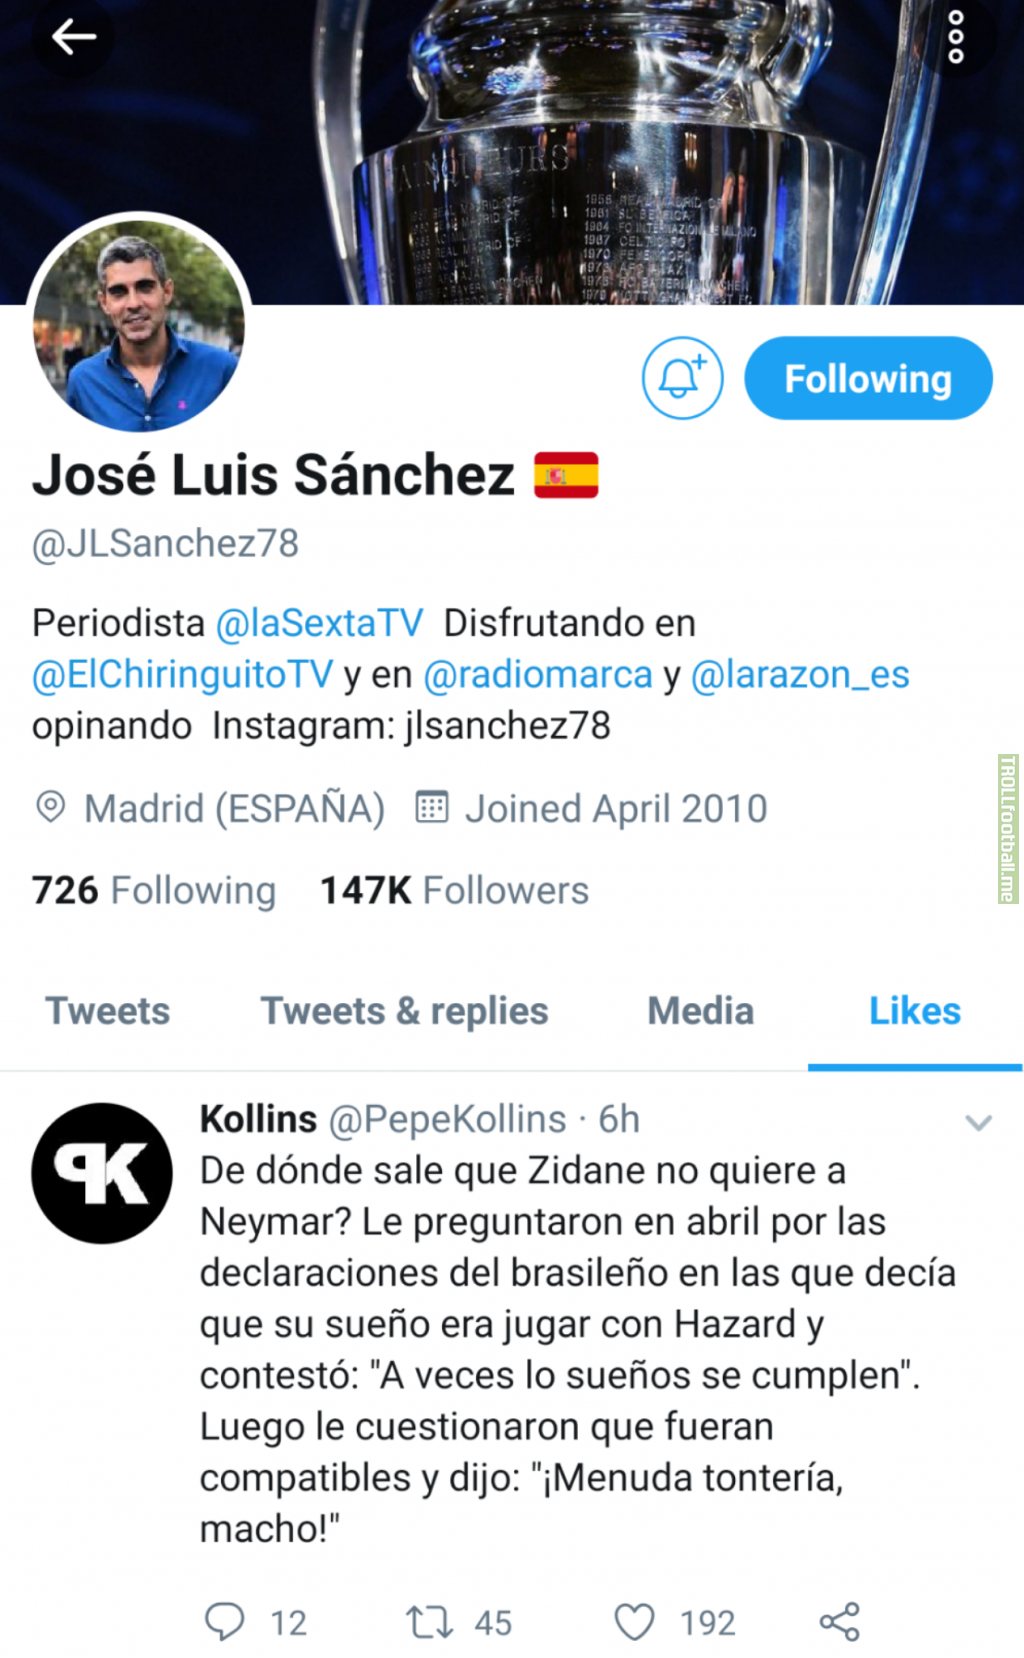 JLS liked a tweet by Pepe Kollins [LA GALERNA] that translates to: where is it coming from that Zidane doesn't want Neymar? They [press] asked him in April about the comments Neymar made about wanting to play with Hazard and Zidane answered "sometimes dreams come true"....{cont in comments}